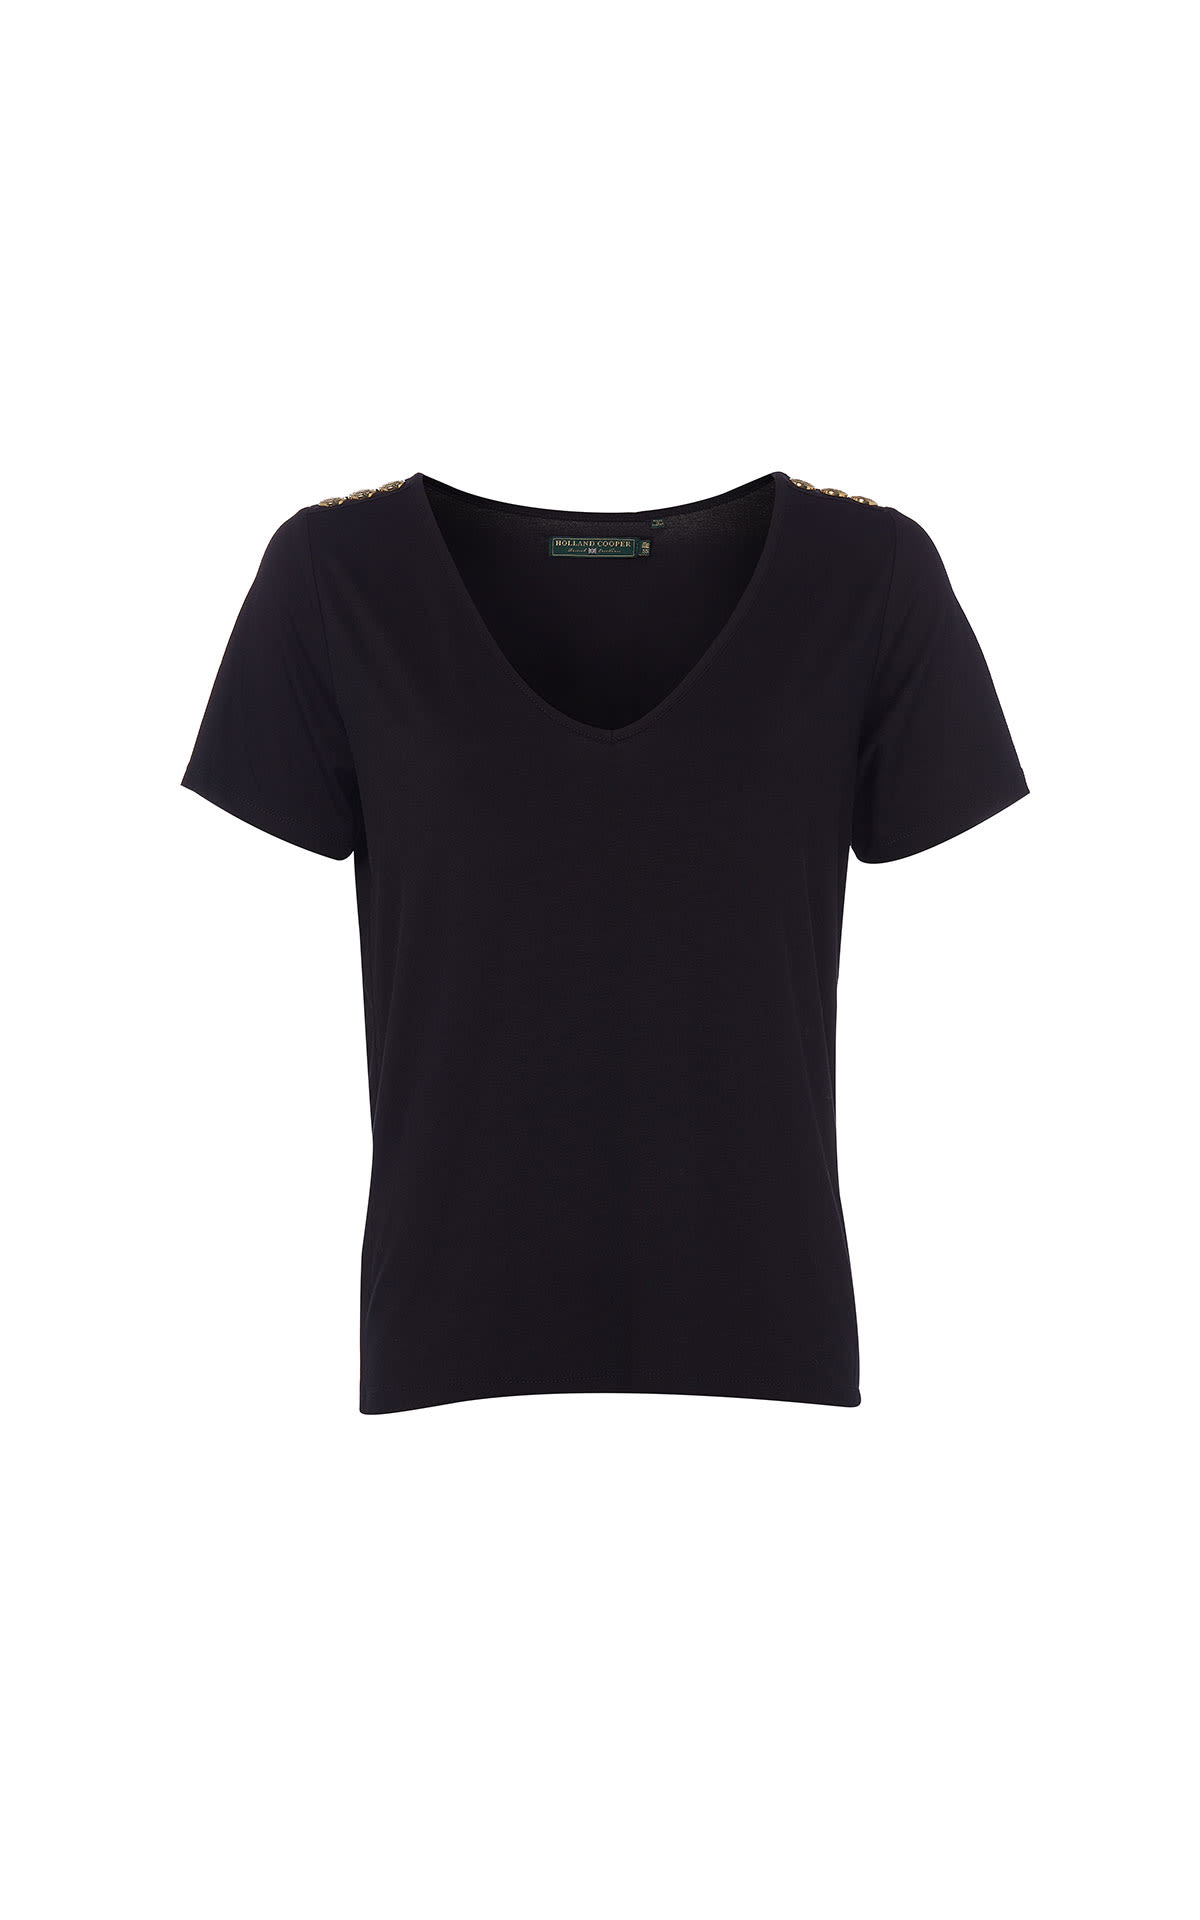 Holland Cooper Relax fit vee neck tee   from Bicester Village